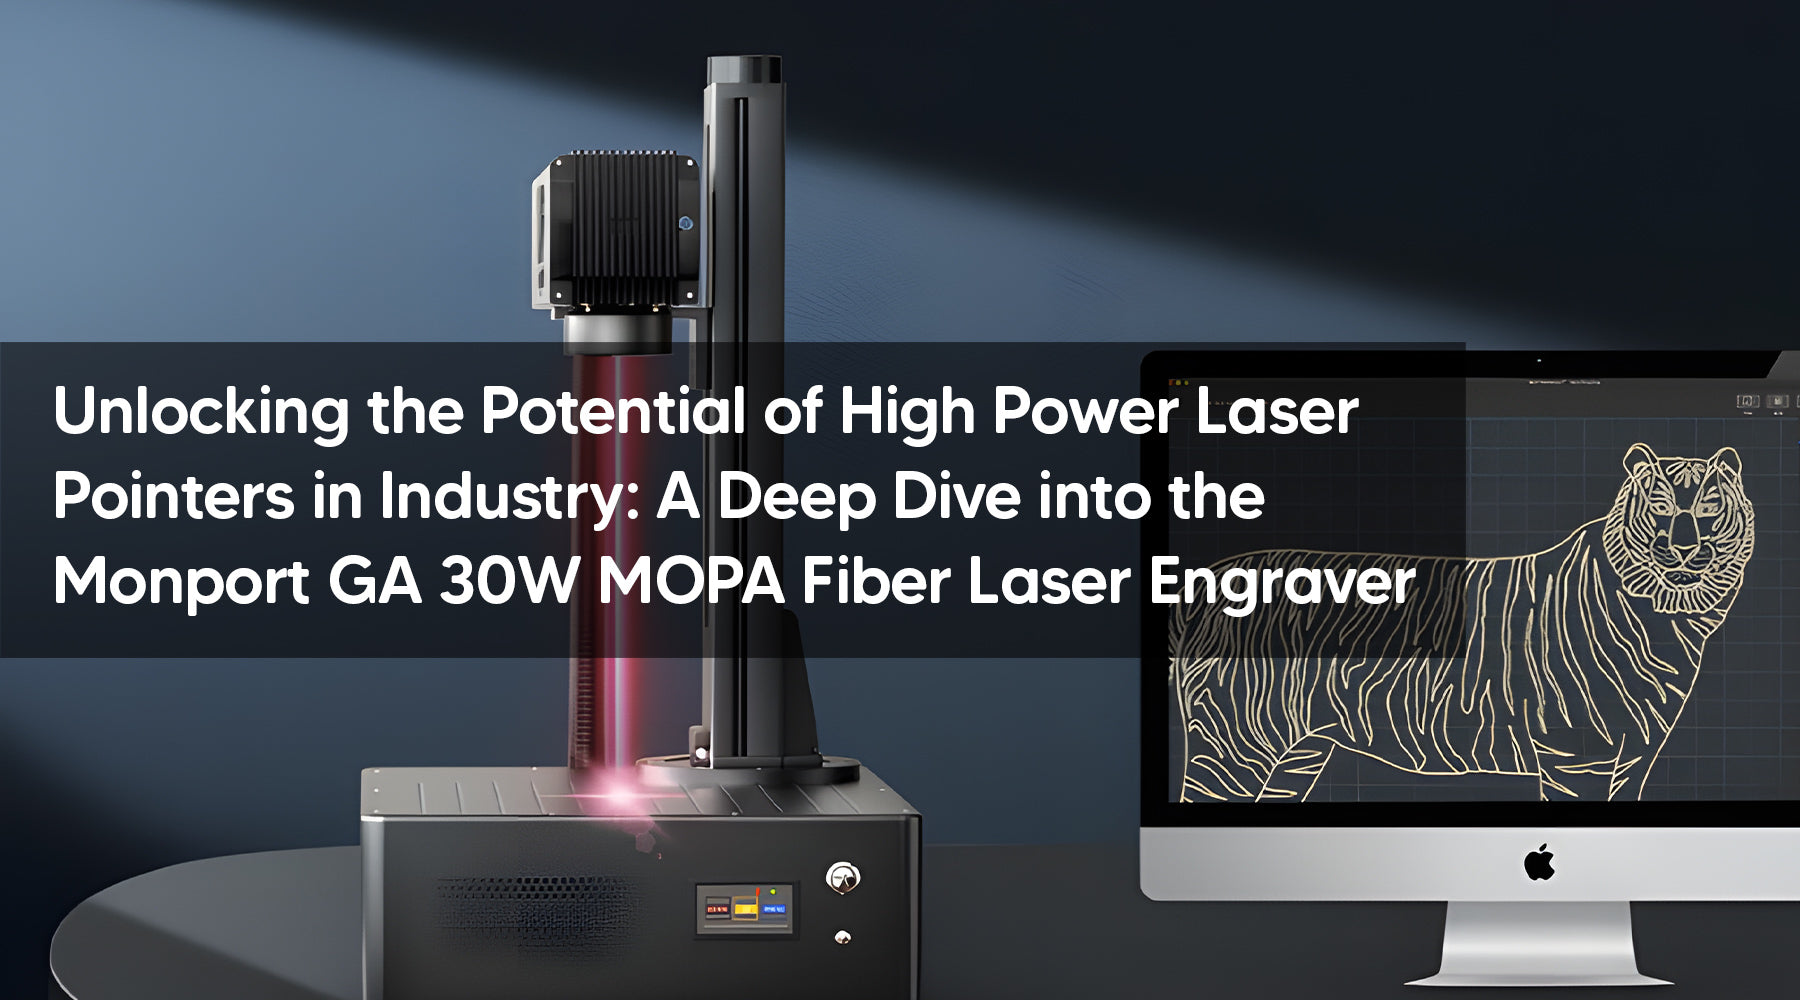 Unlocking the Potential of High Power Laser Pointers in Industry: A Deep Dive into the Monport GA 30W MOPA Fiber Laser Engraver